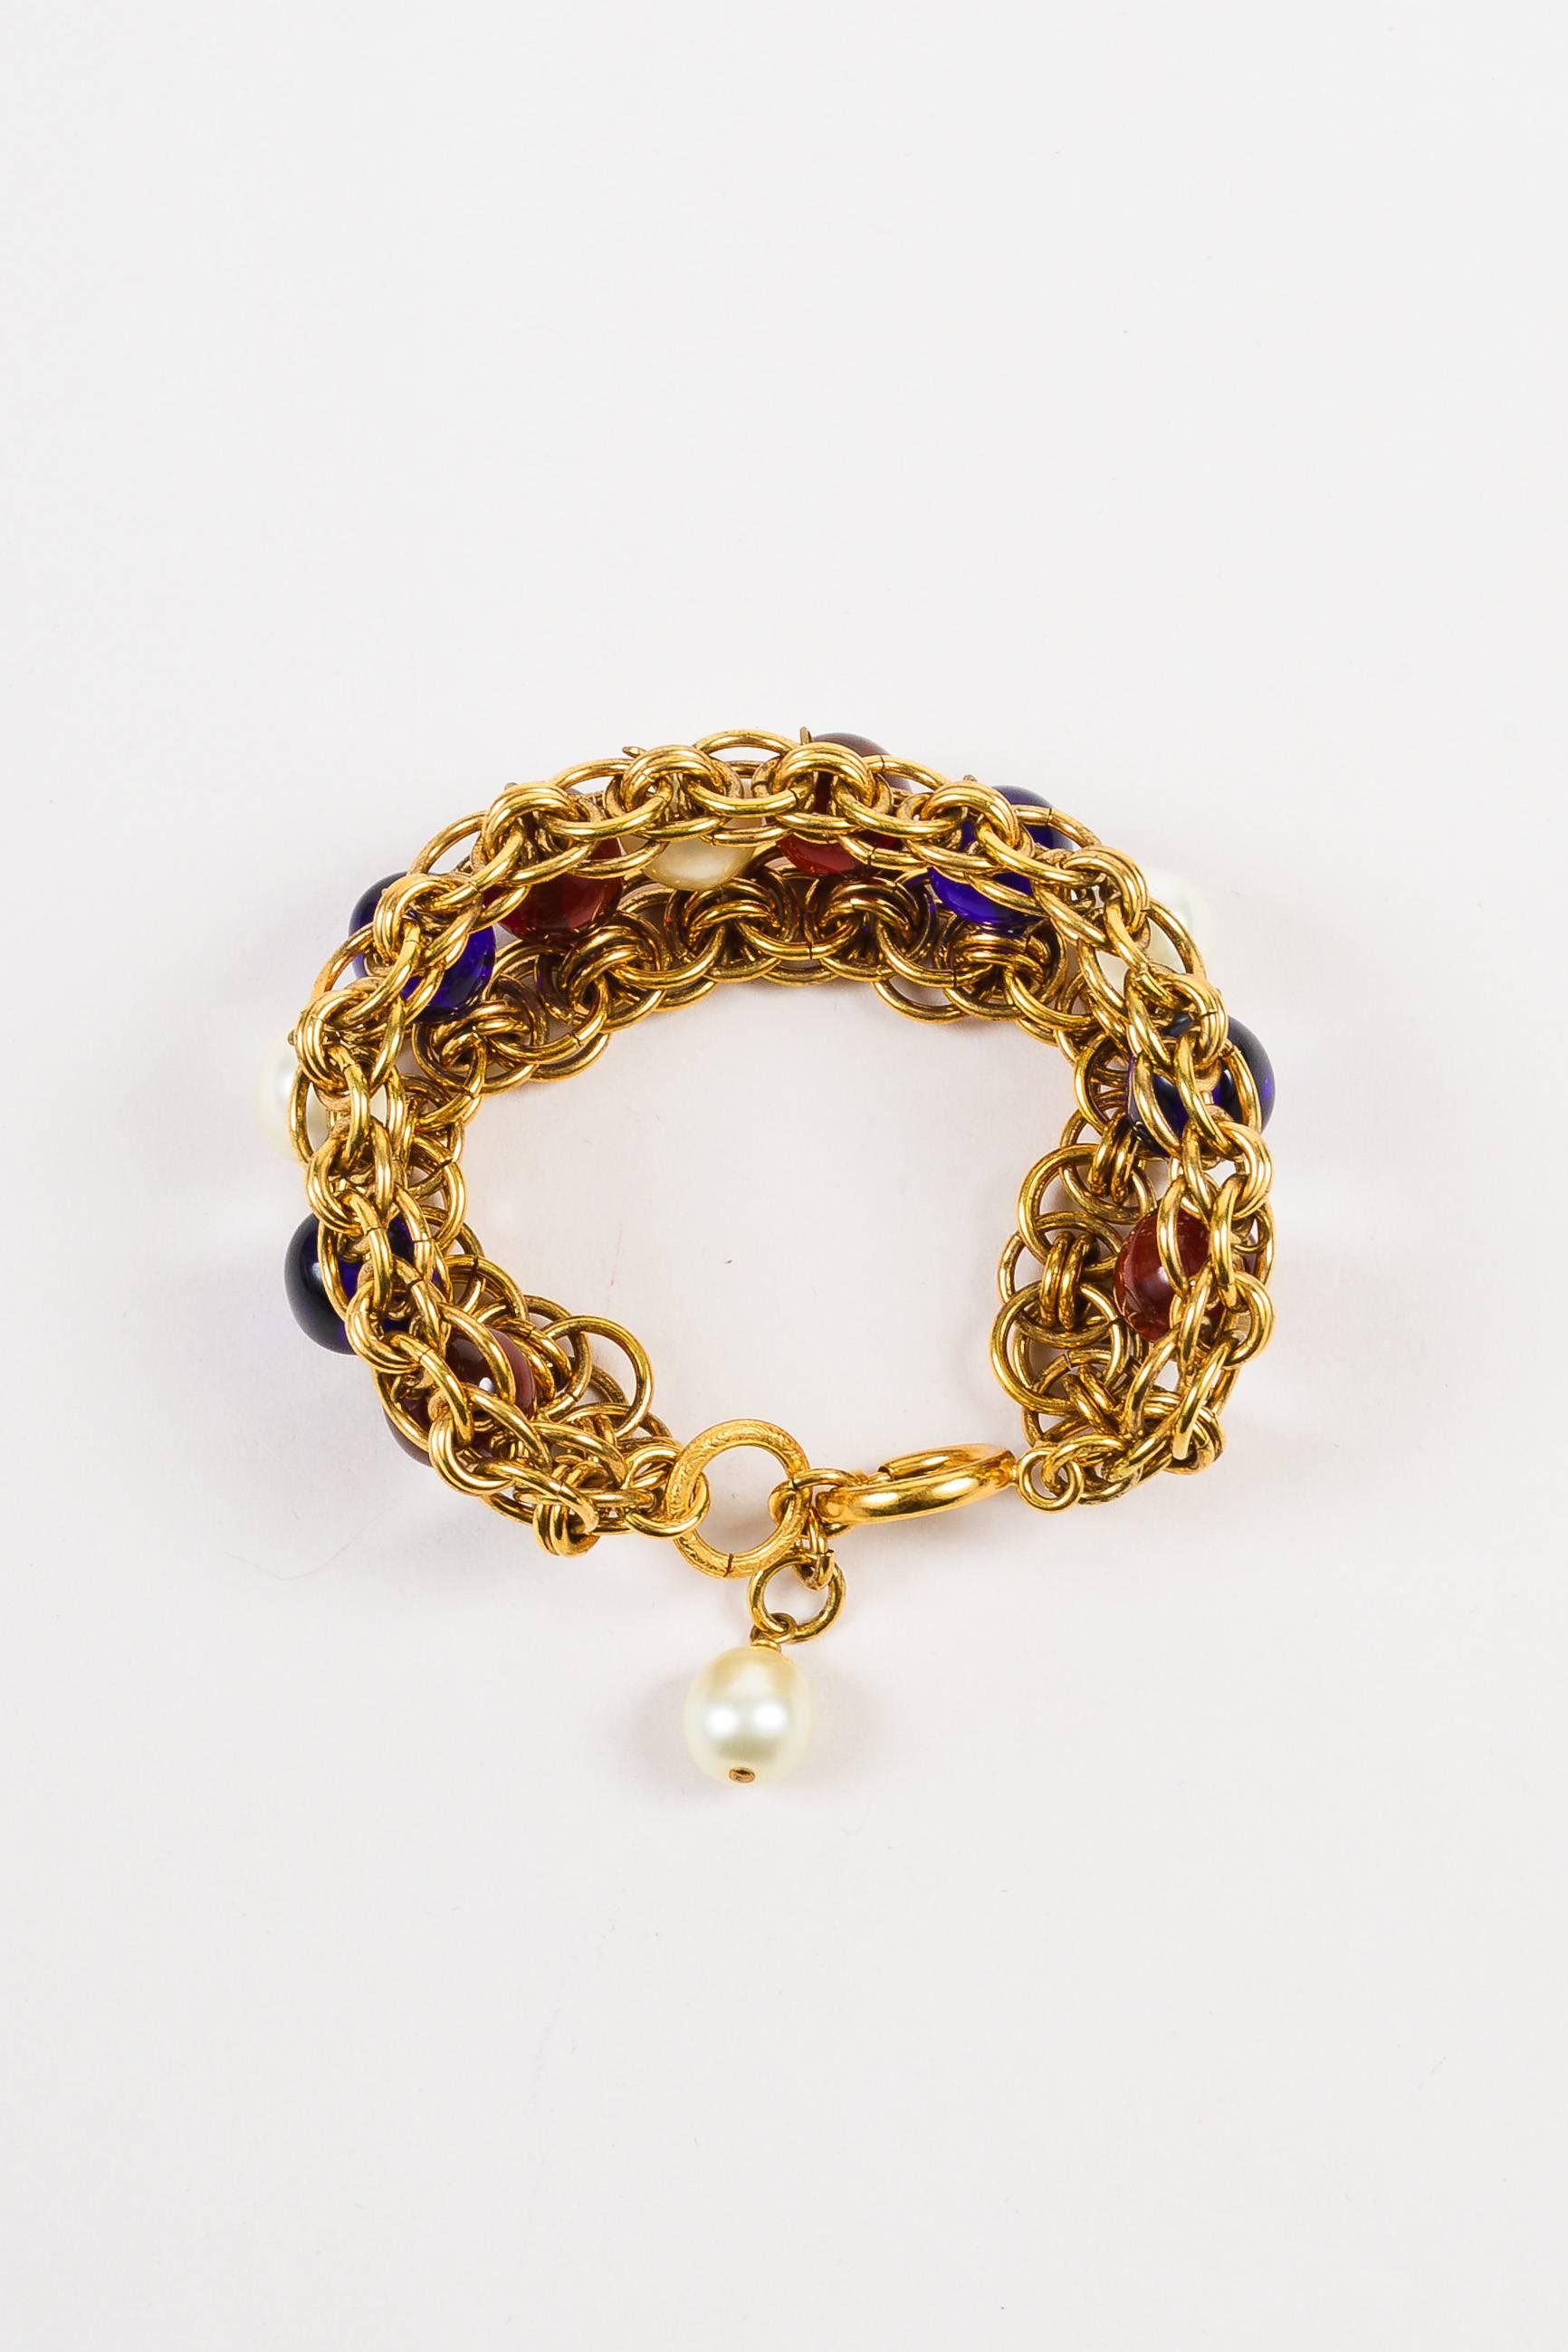 Vintage Chanel Gold Tone Blue Red Faux Pearl Beaded Layered Chain Link Bracelet In Fair Condition For Sale In Chicago, IL